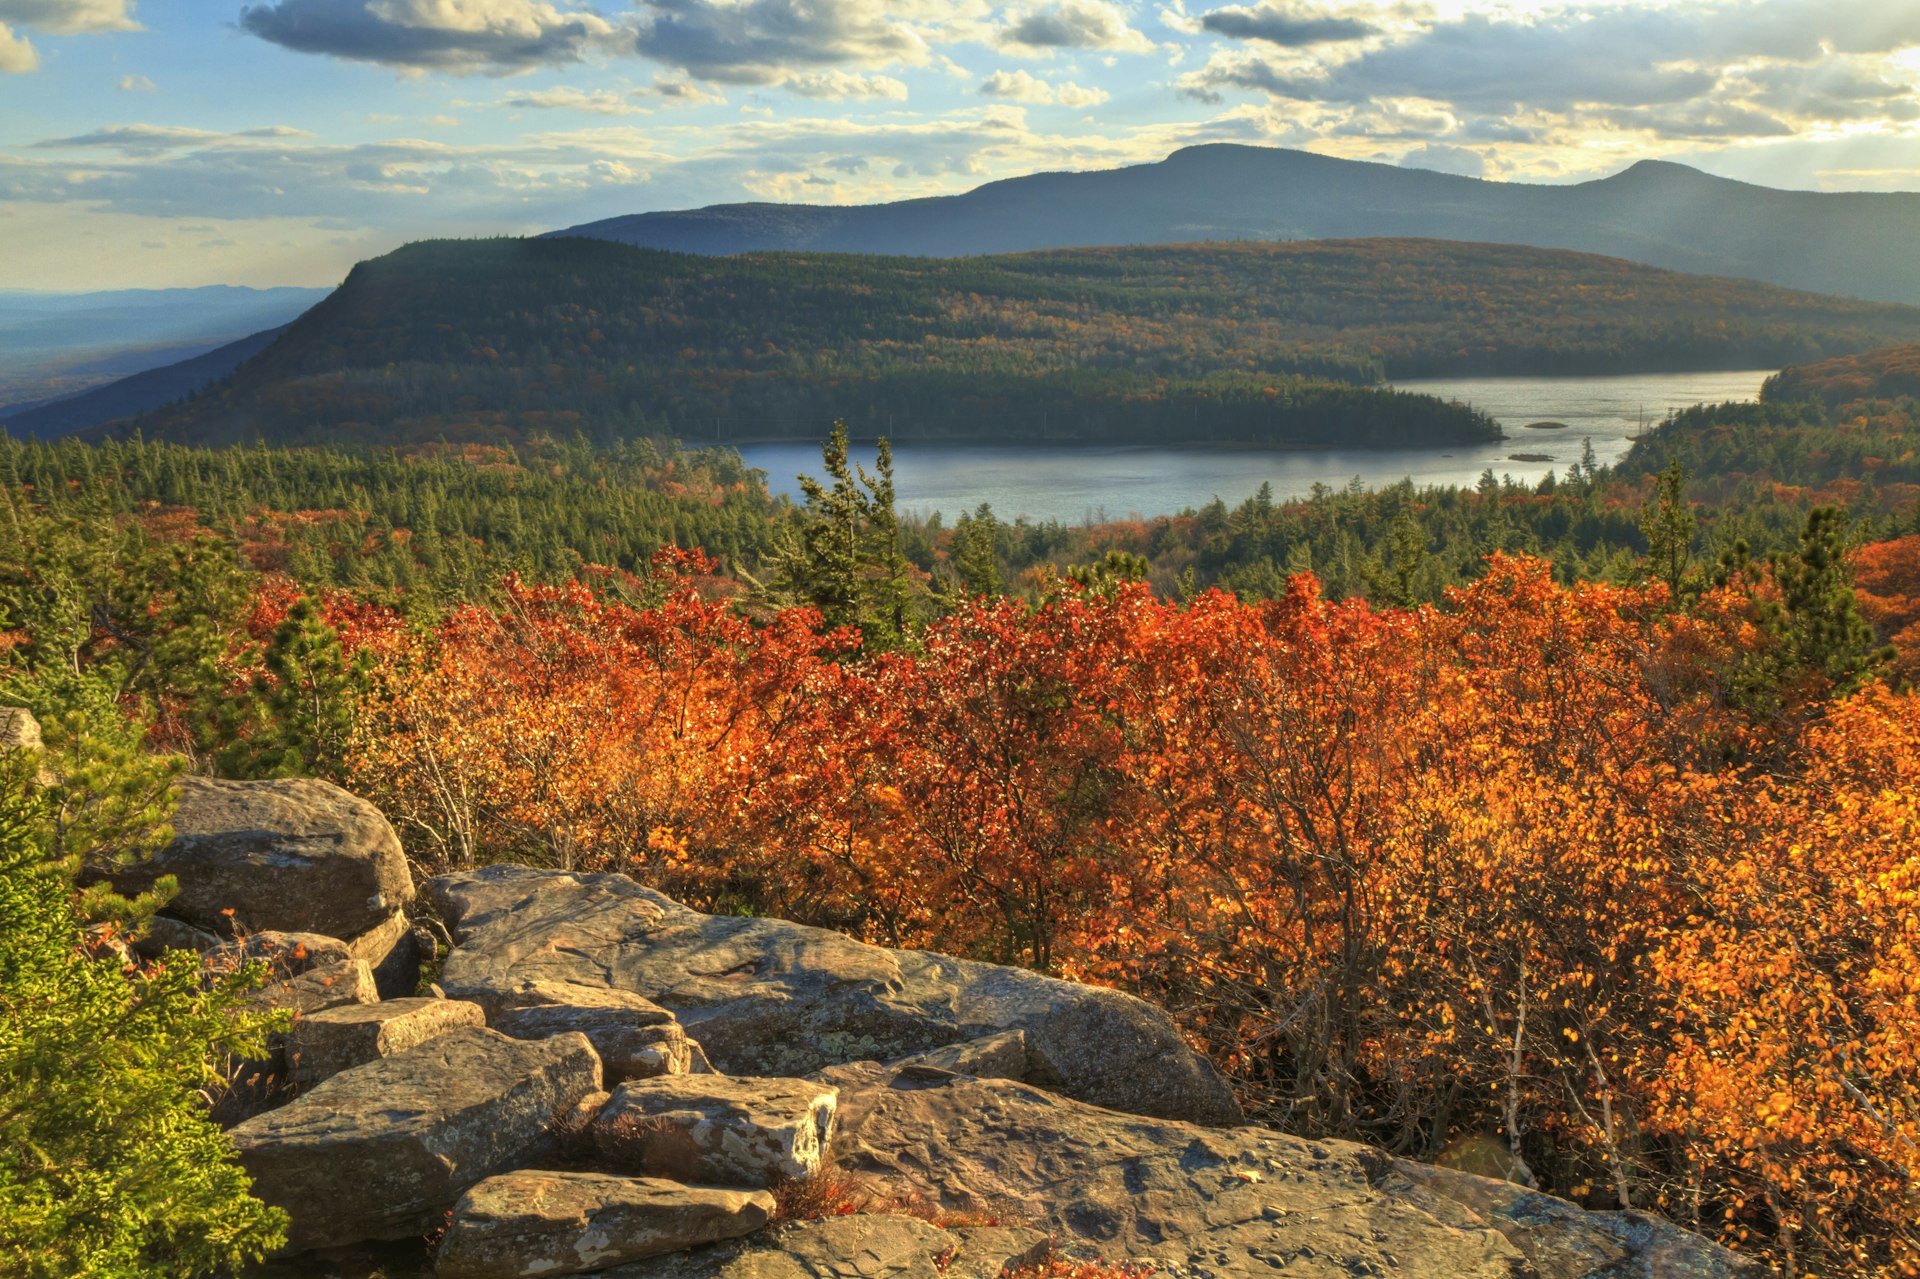 Autumn Day at Sunset Rock, overlooking North-South Lake in the Catskills Mountains of New York